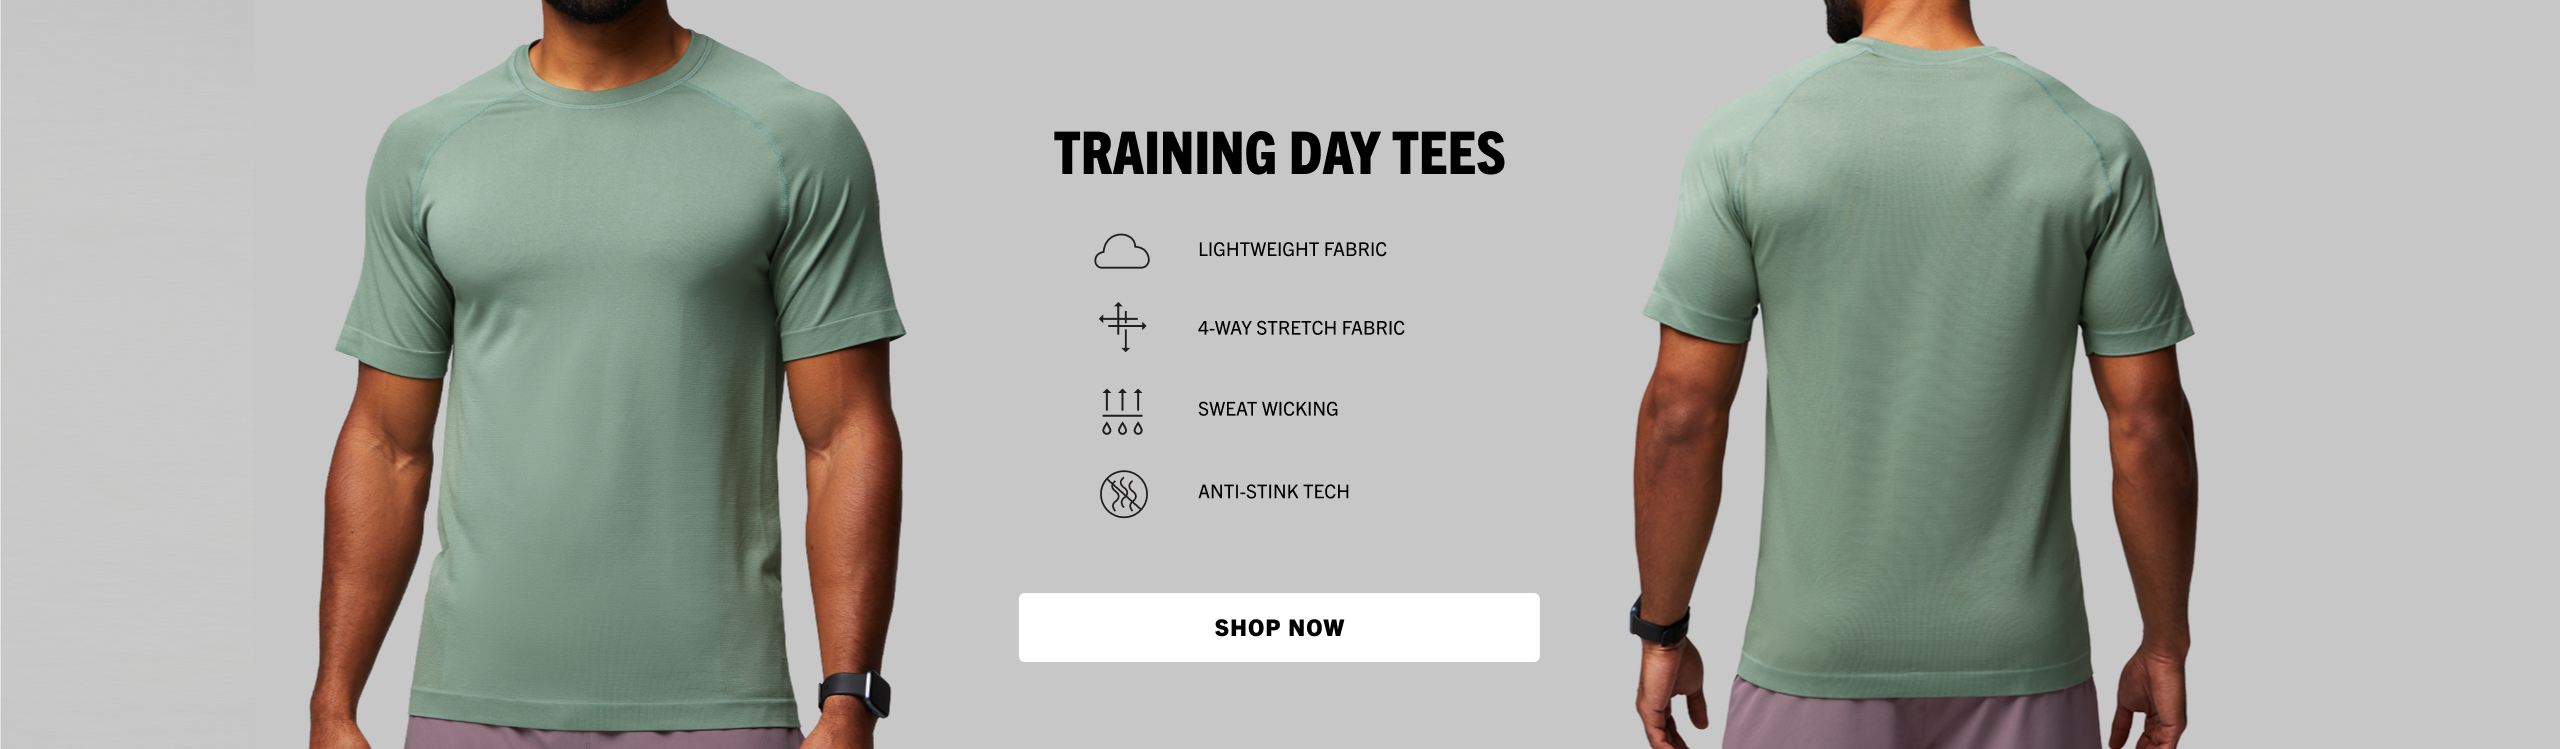 Click to shop Training Day Tees. Featuring a lightweight fabric, 4-way stretch, sweat wicking, and anti-stink tech.